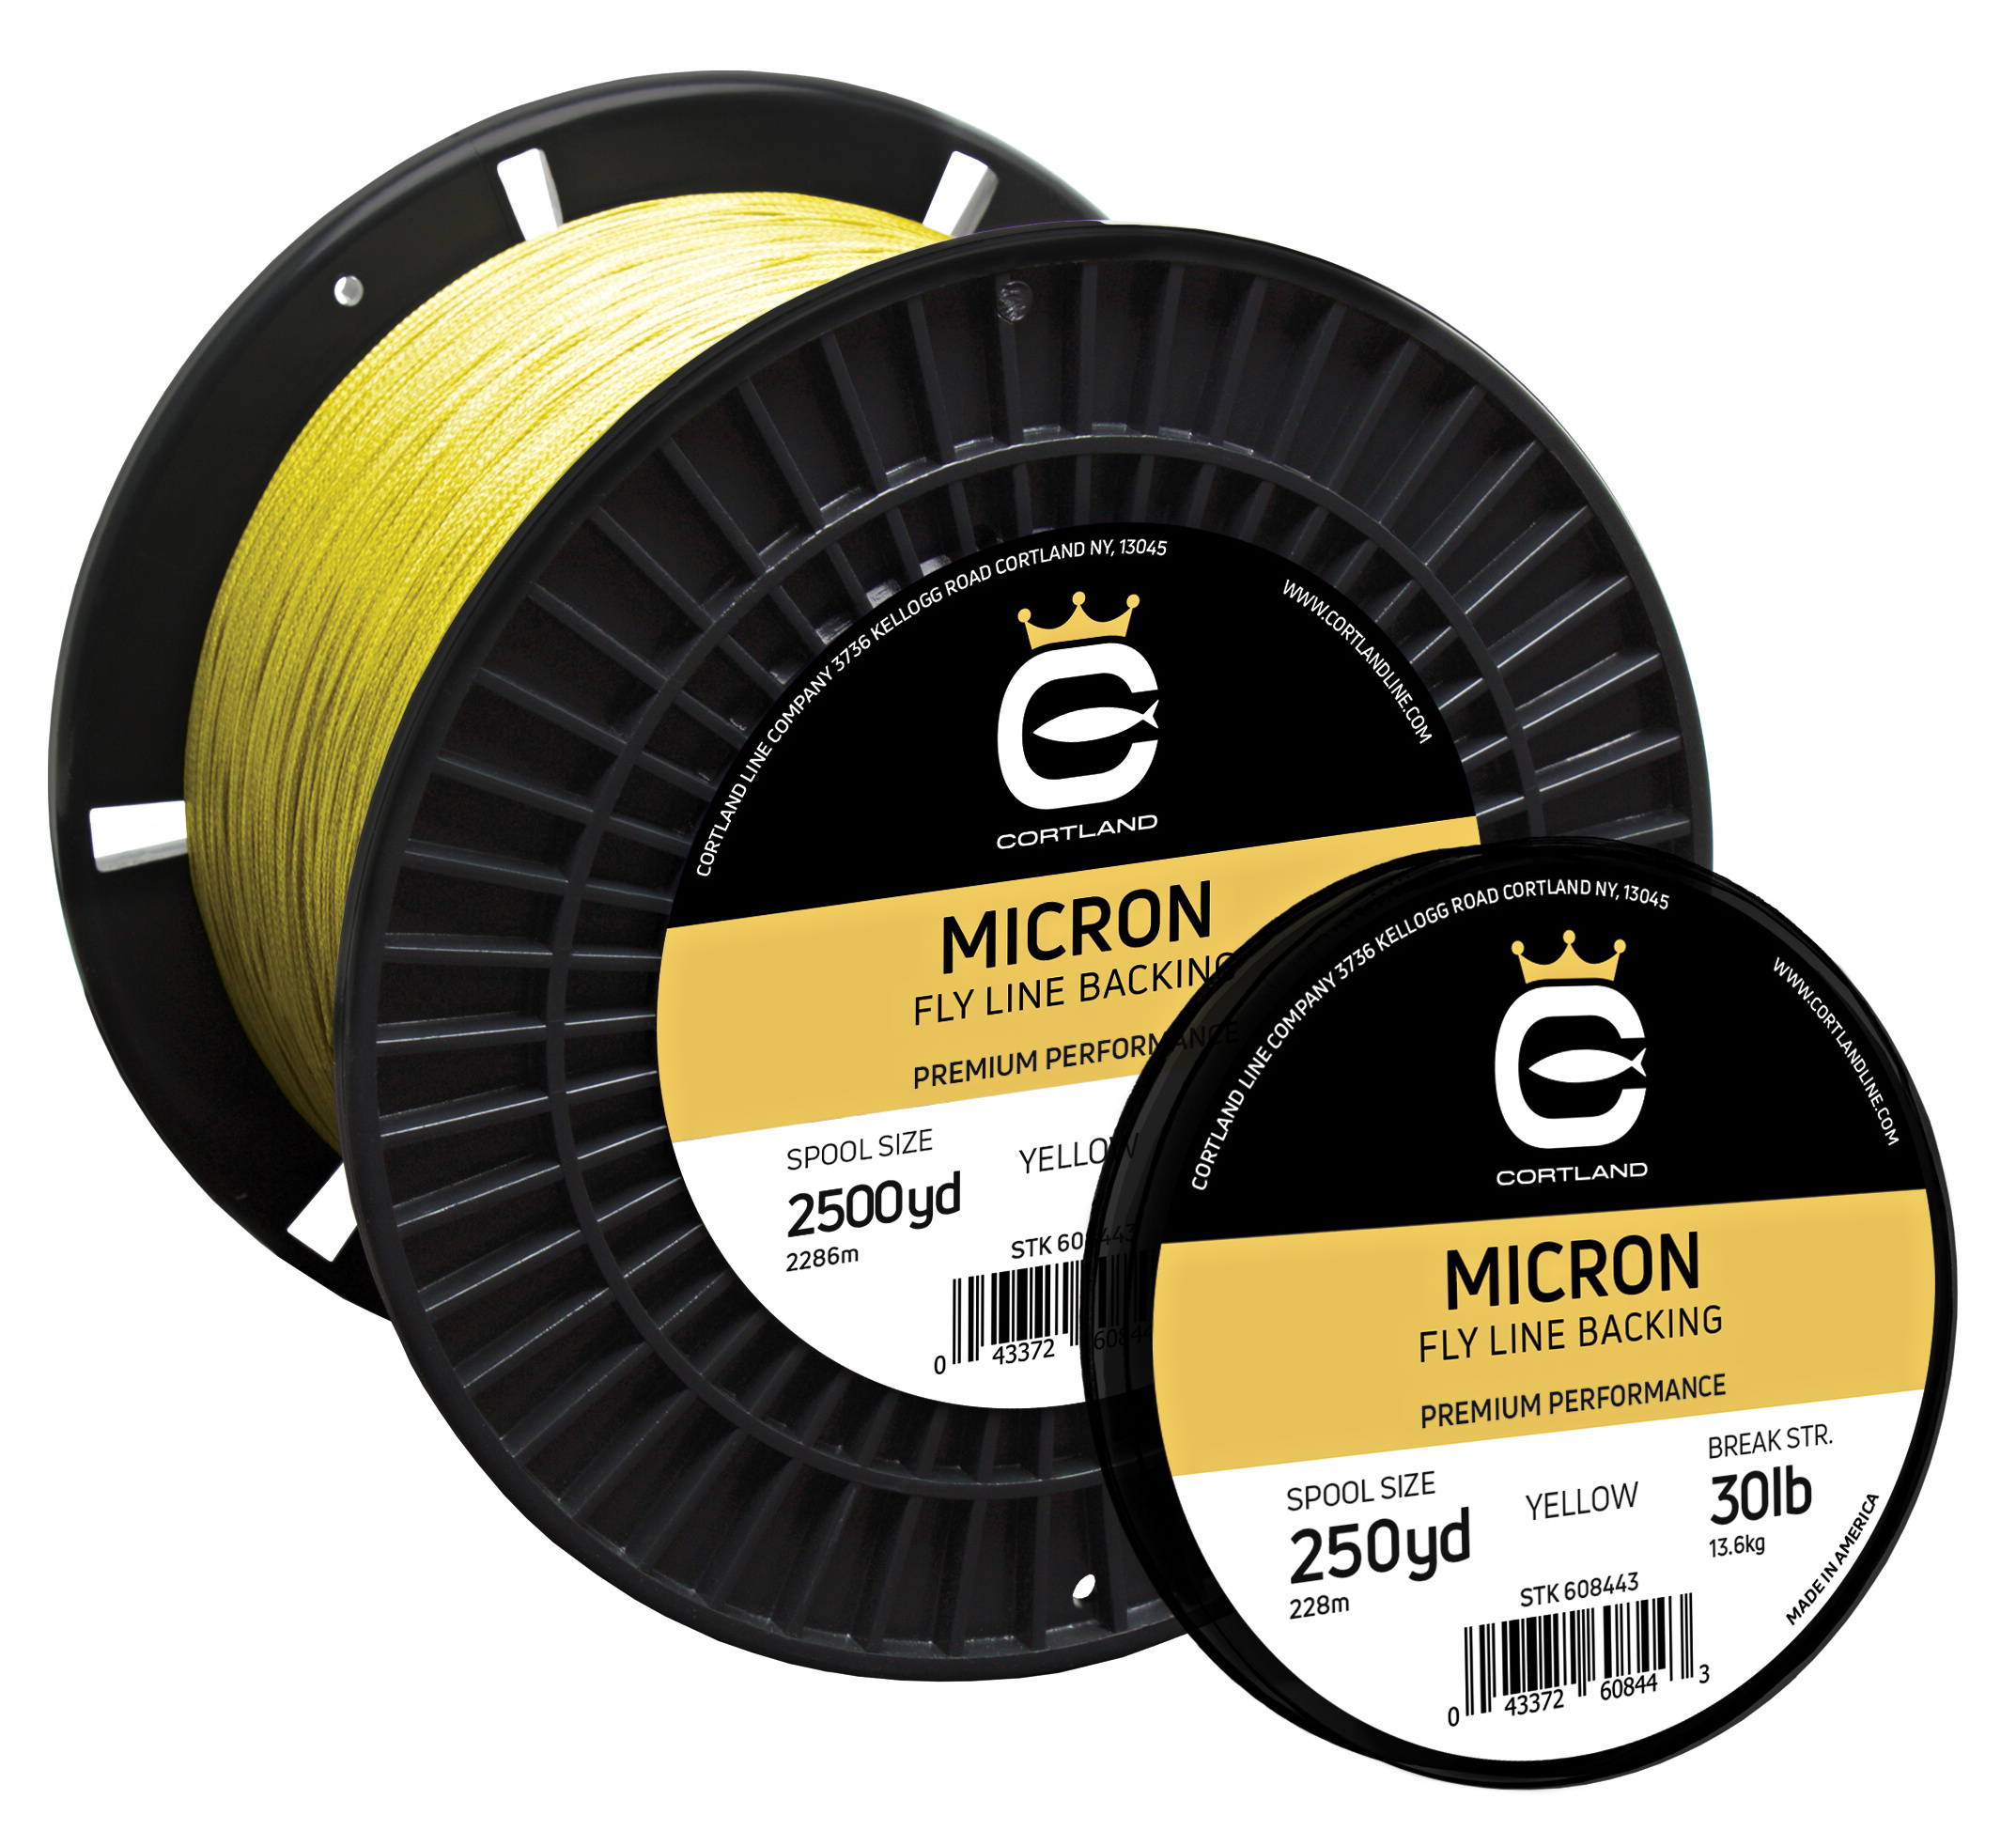 Cortland Micron Micronite Fly Line Backing Choose Your Color Test Yards 